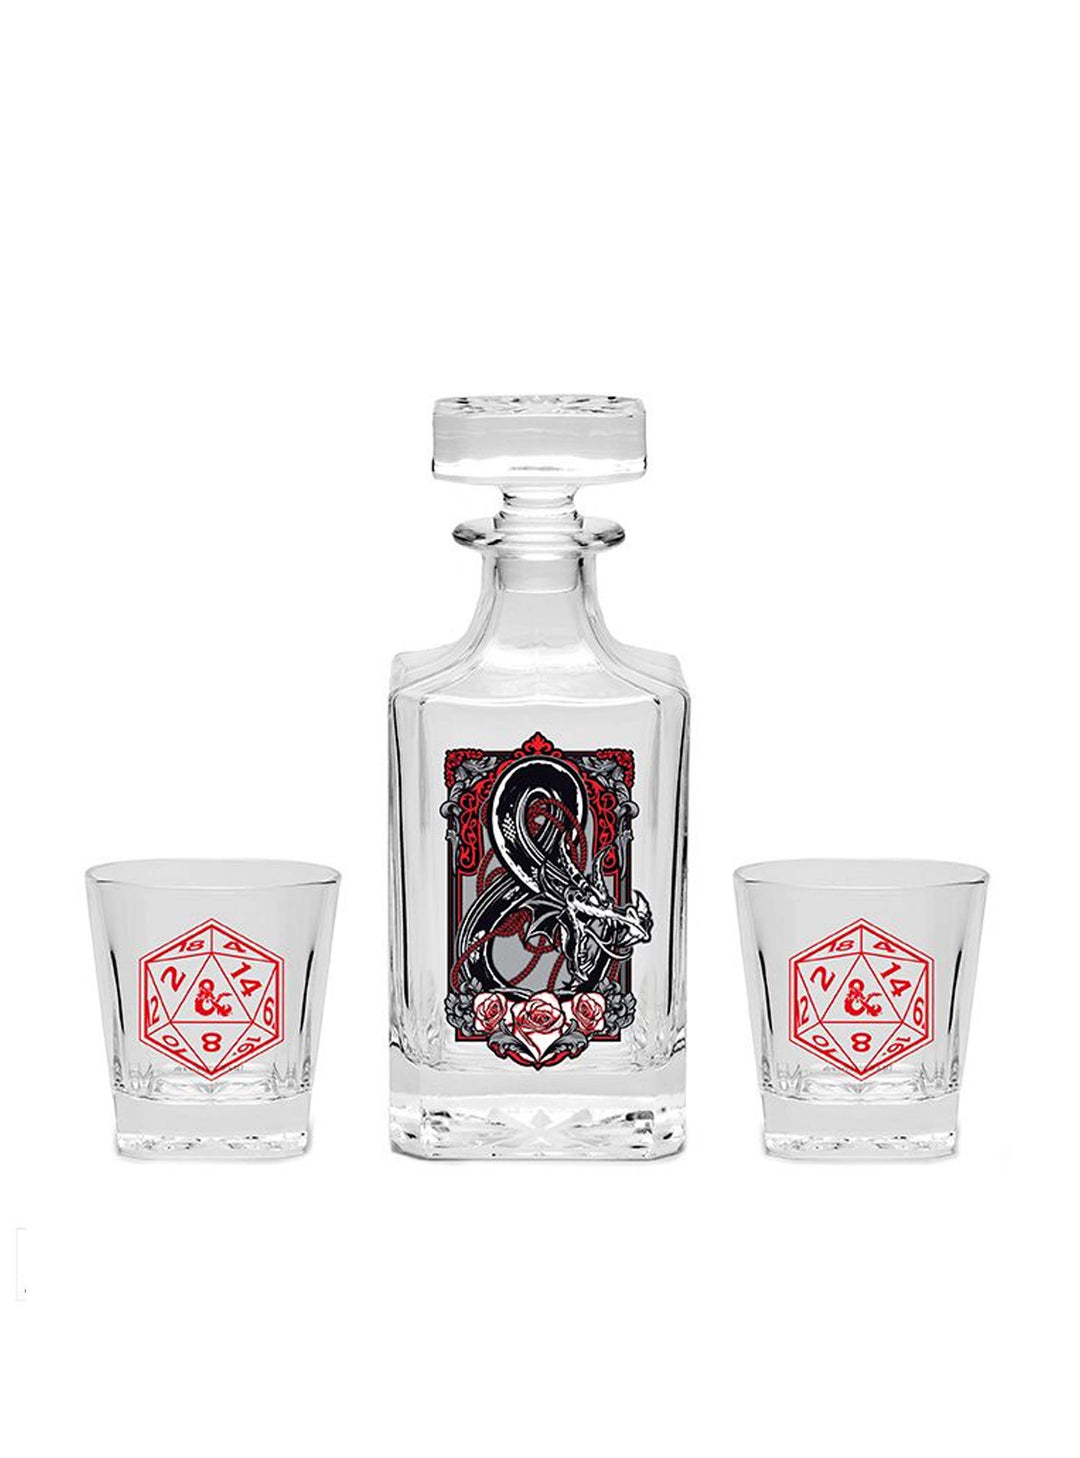 Dungeons & Dragons glass decanter